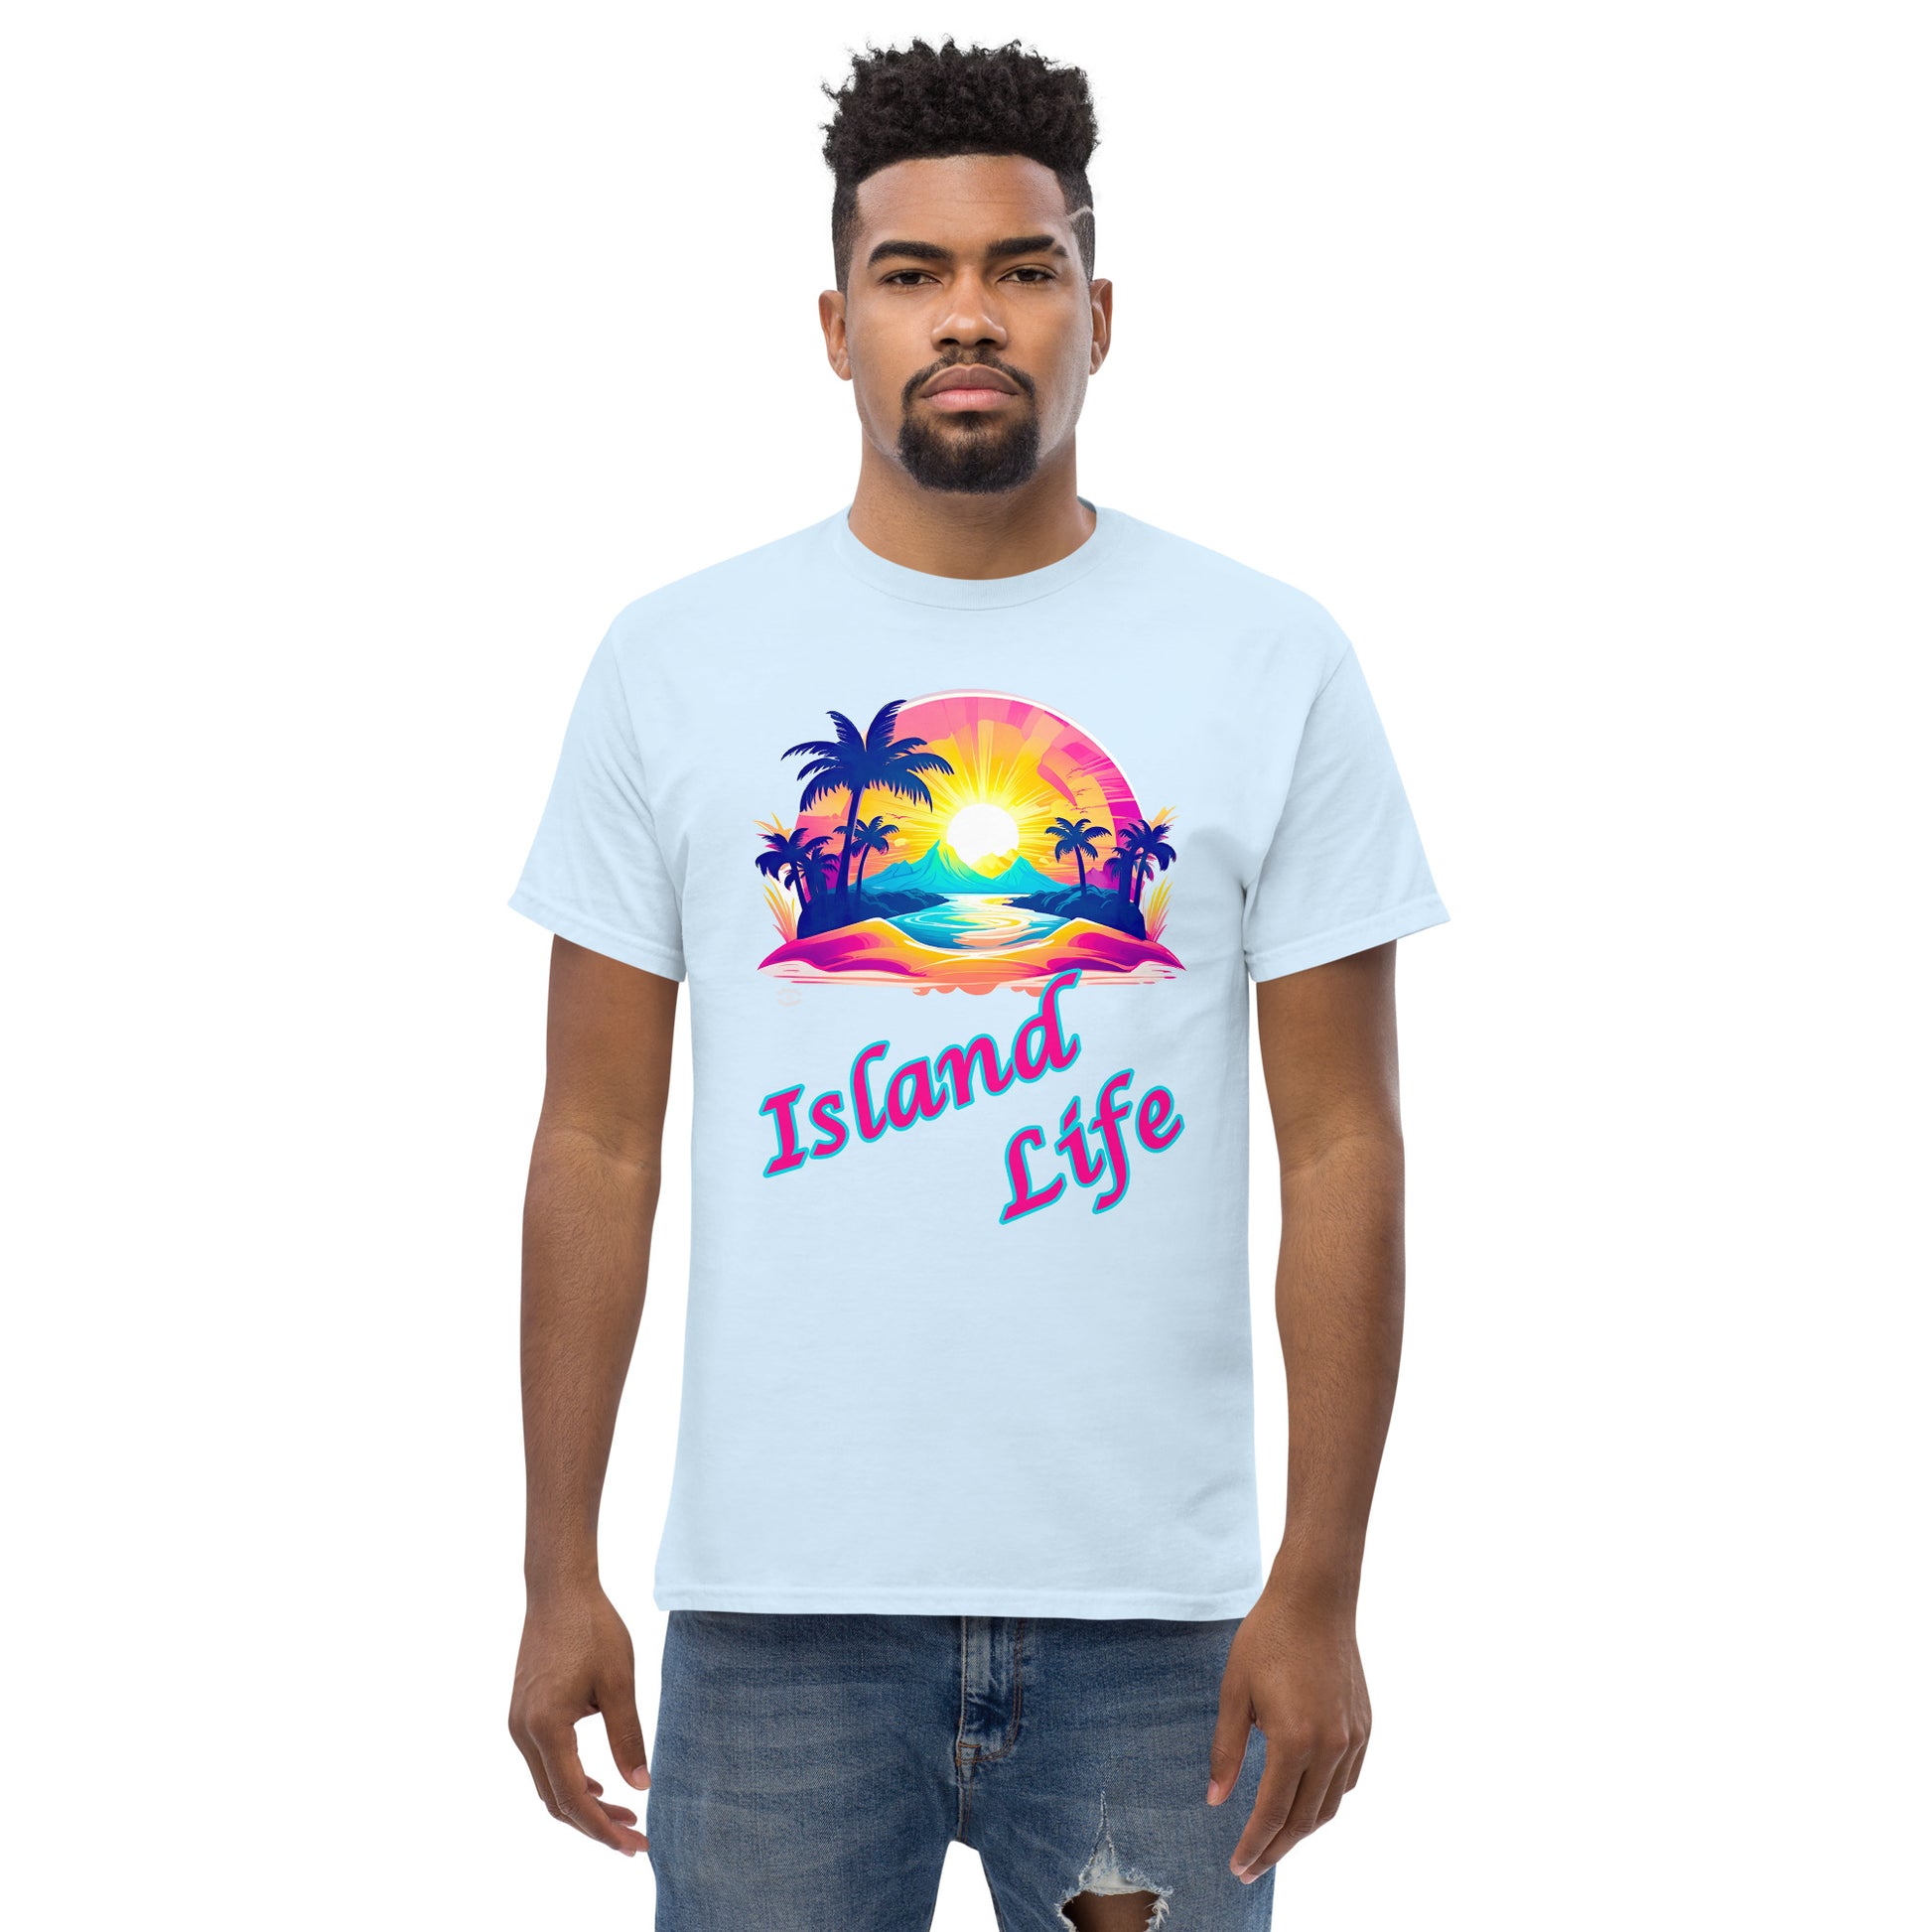 A picture of a man modeling a Men's Classic Tee / Tshirt with a large picture on the front of a tropical island paradise and the text Island Life underneath - front - light blue